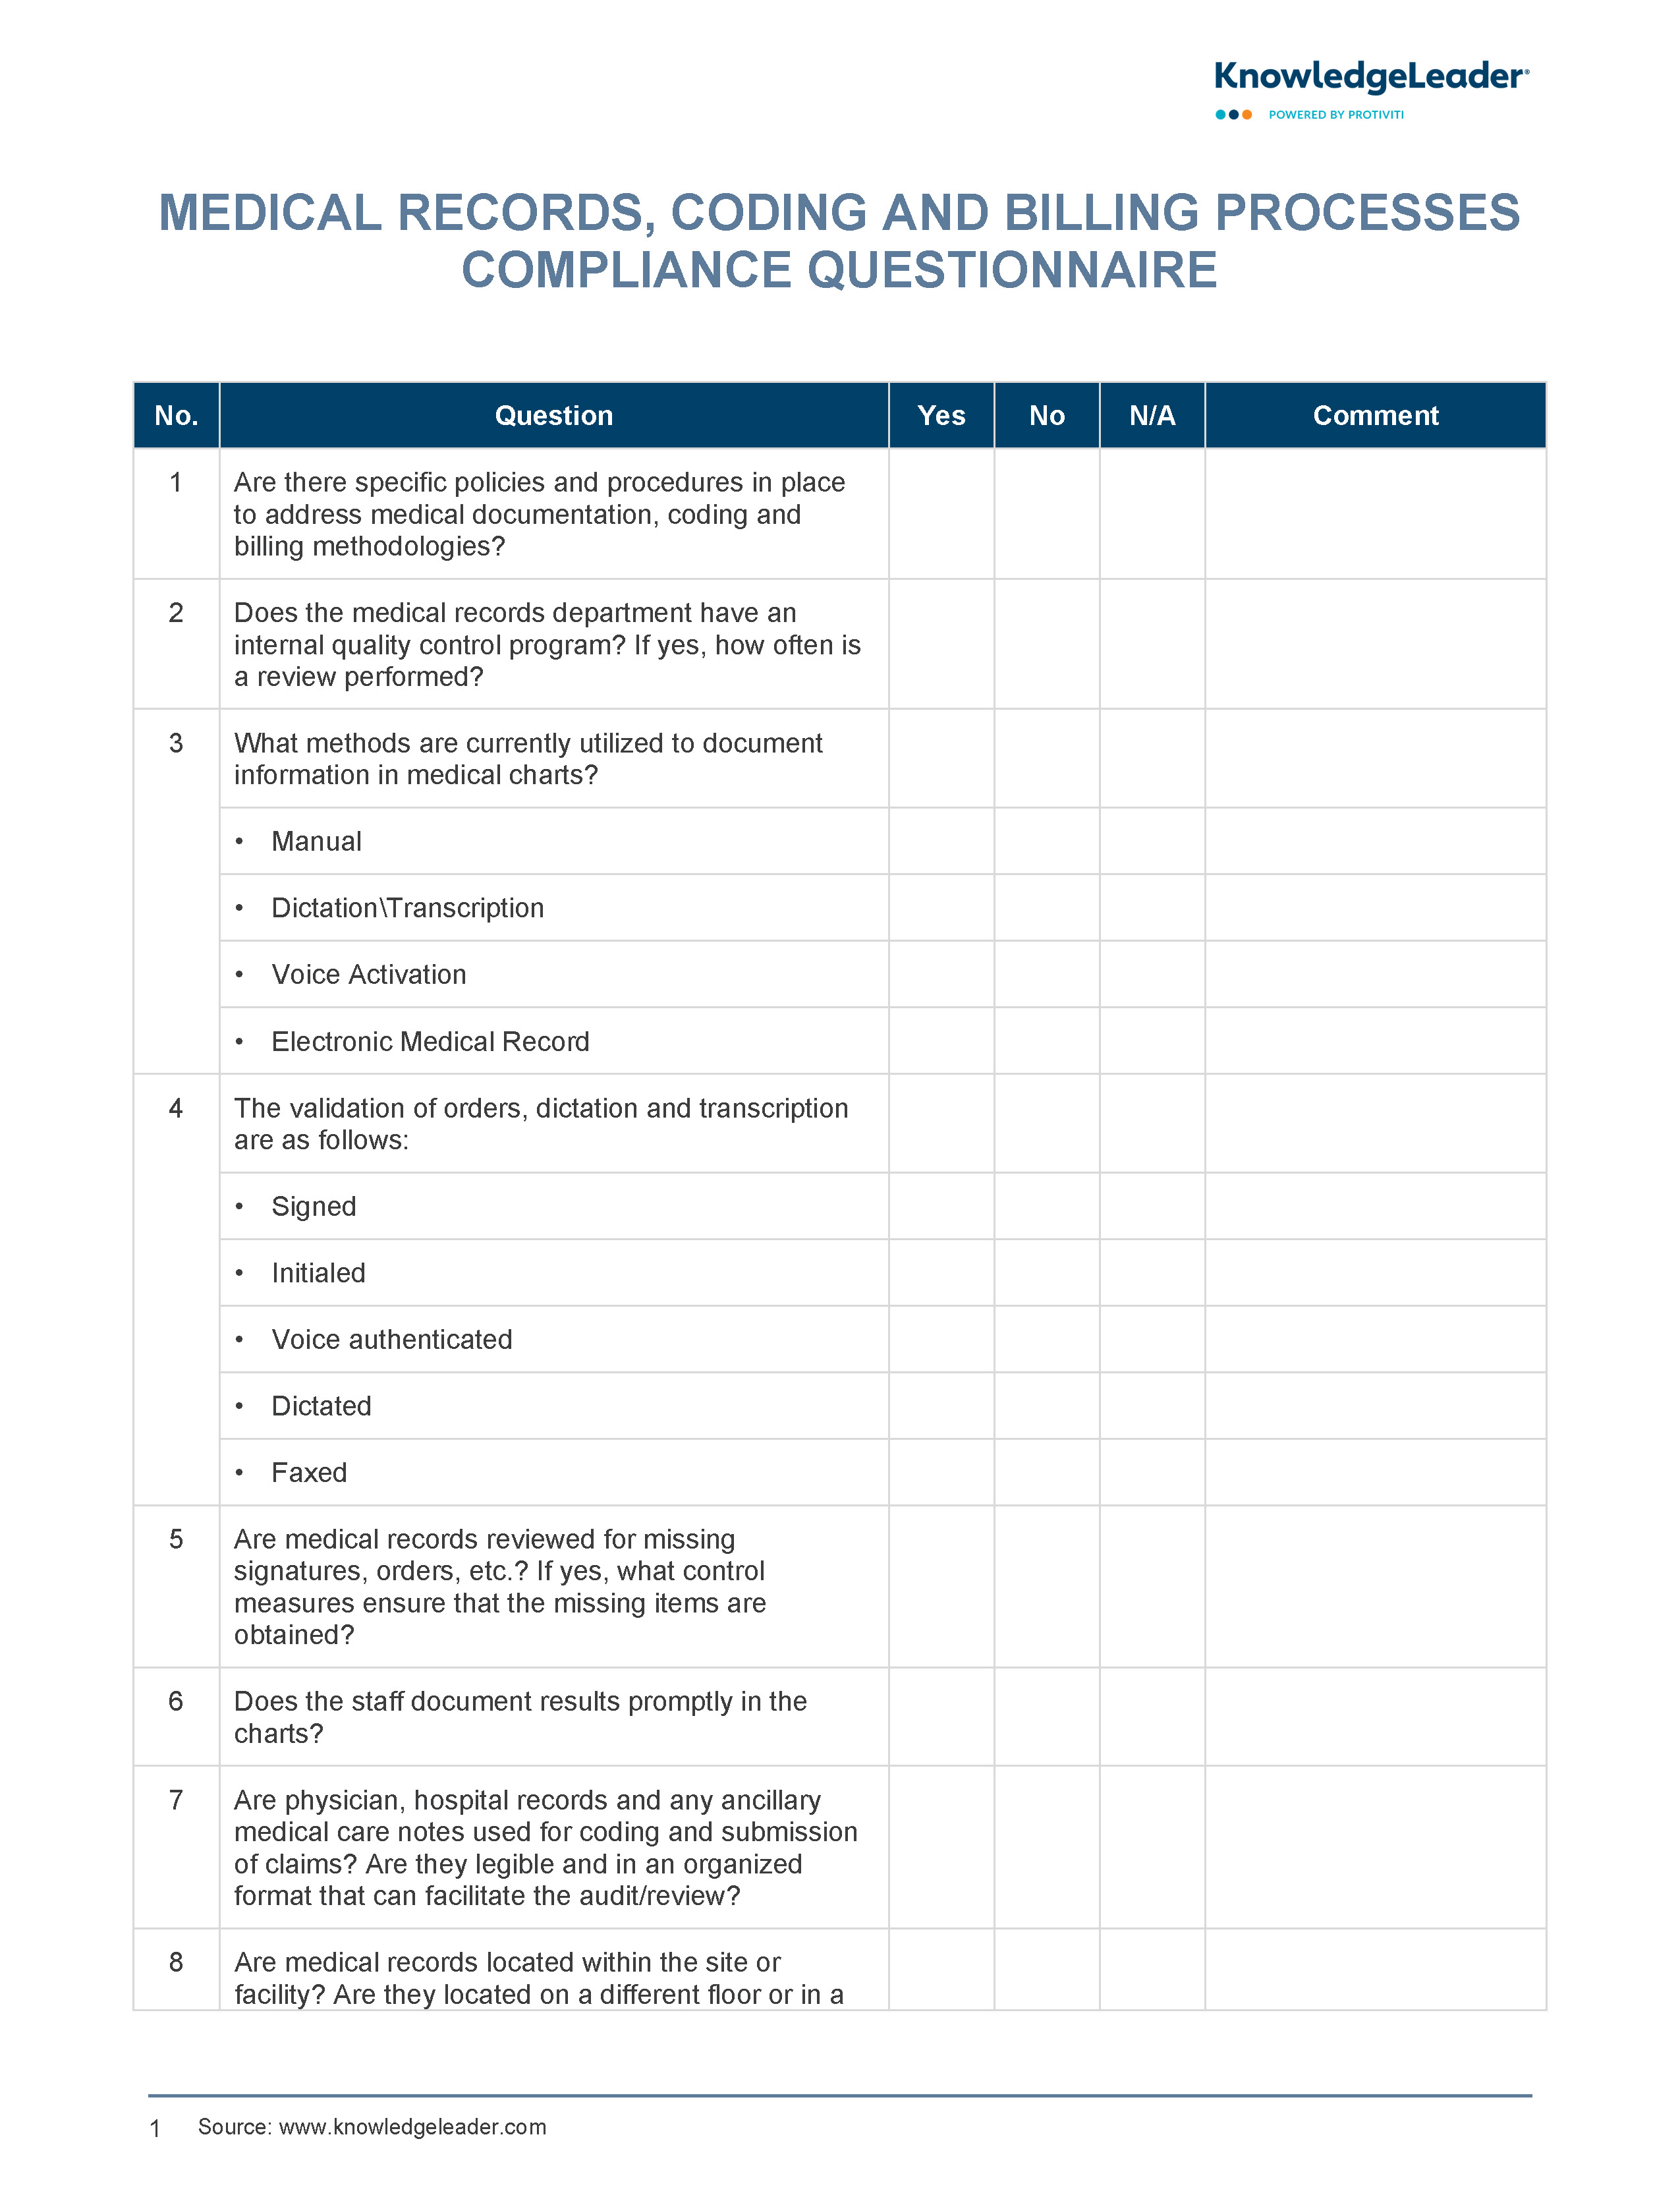 Screenshot of the first page of Medical Records, Coding, and Billing Processes Compliance Questionnaire